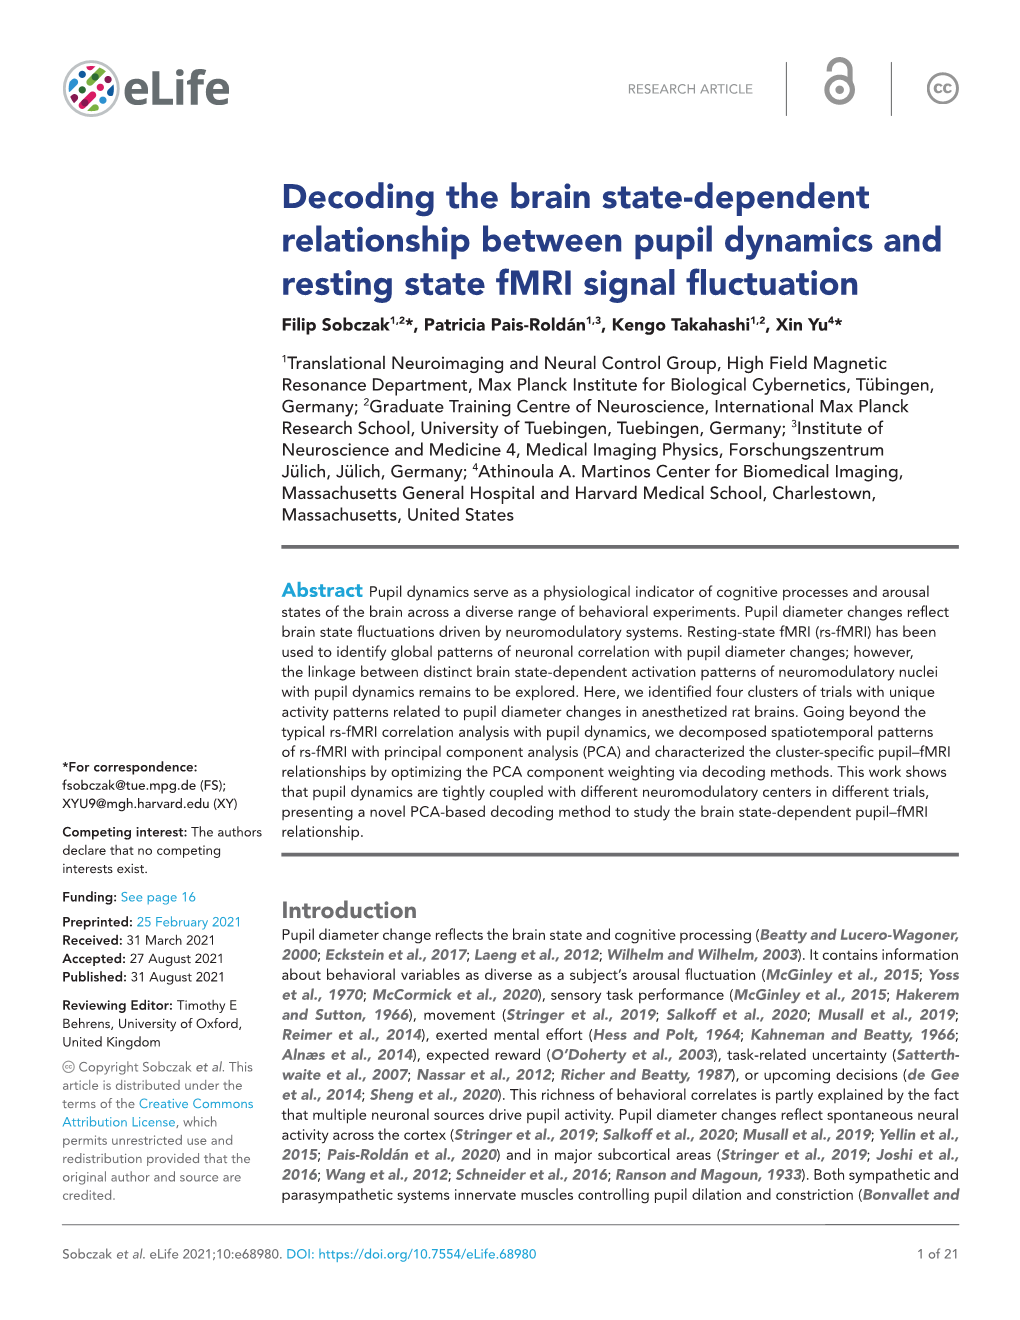 1 Decoding the Brain State-Dependent Relationship Between Pupil